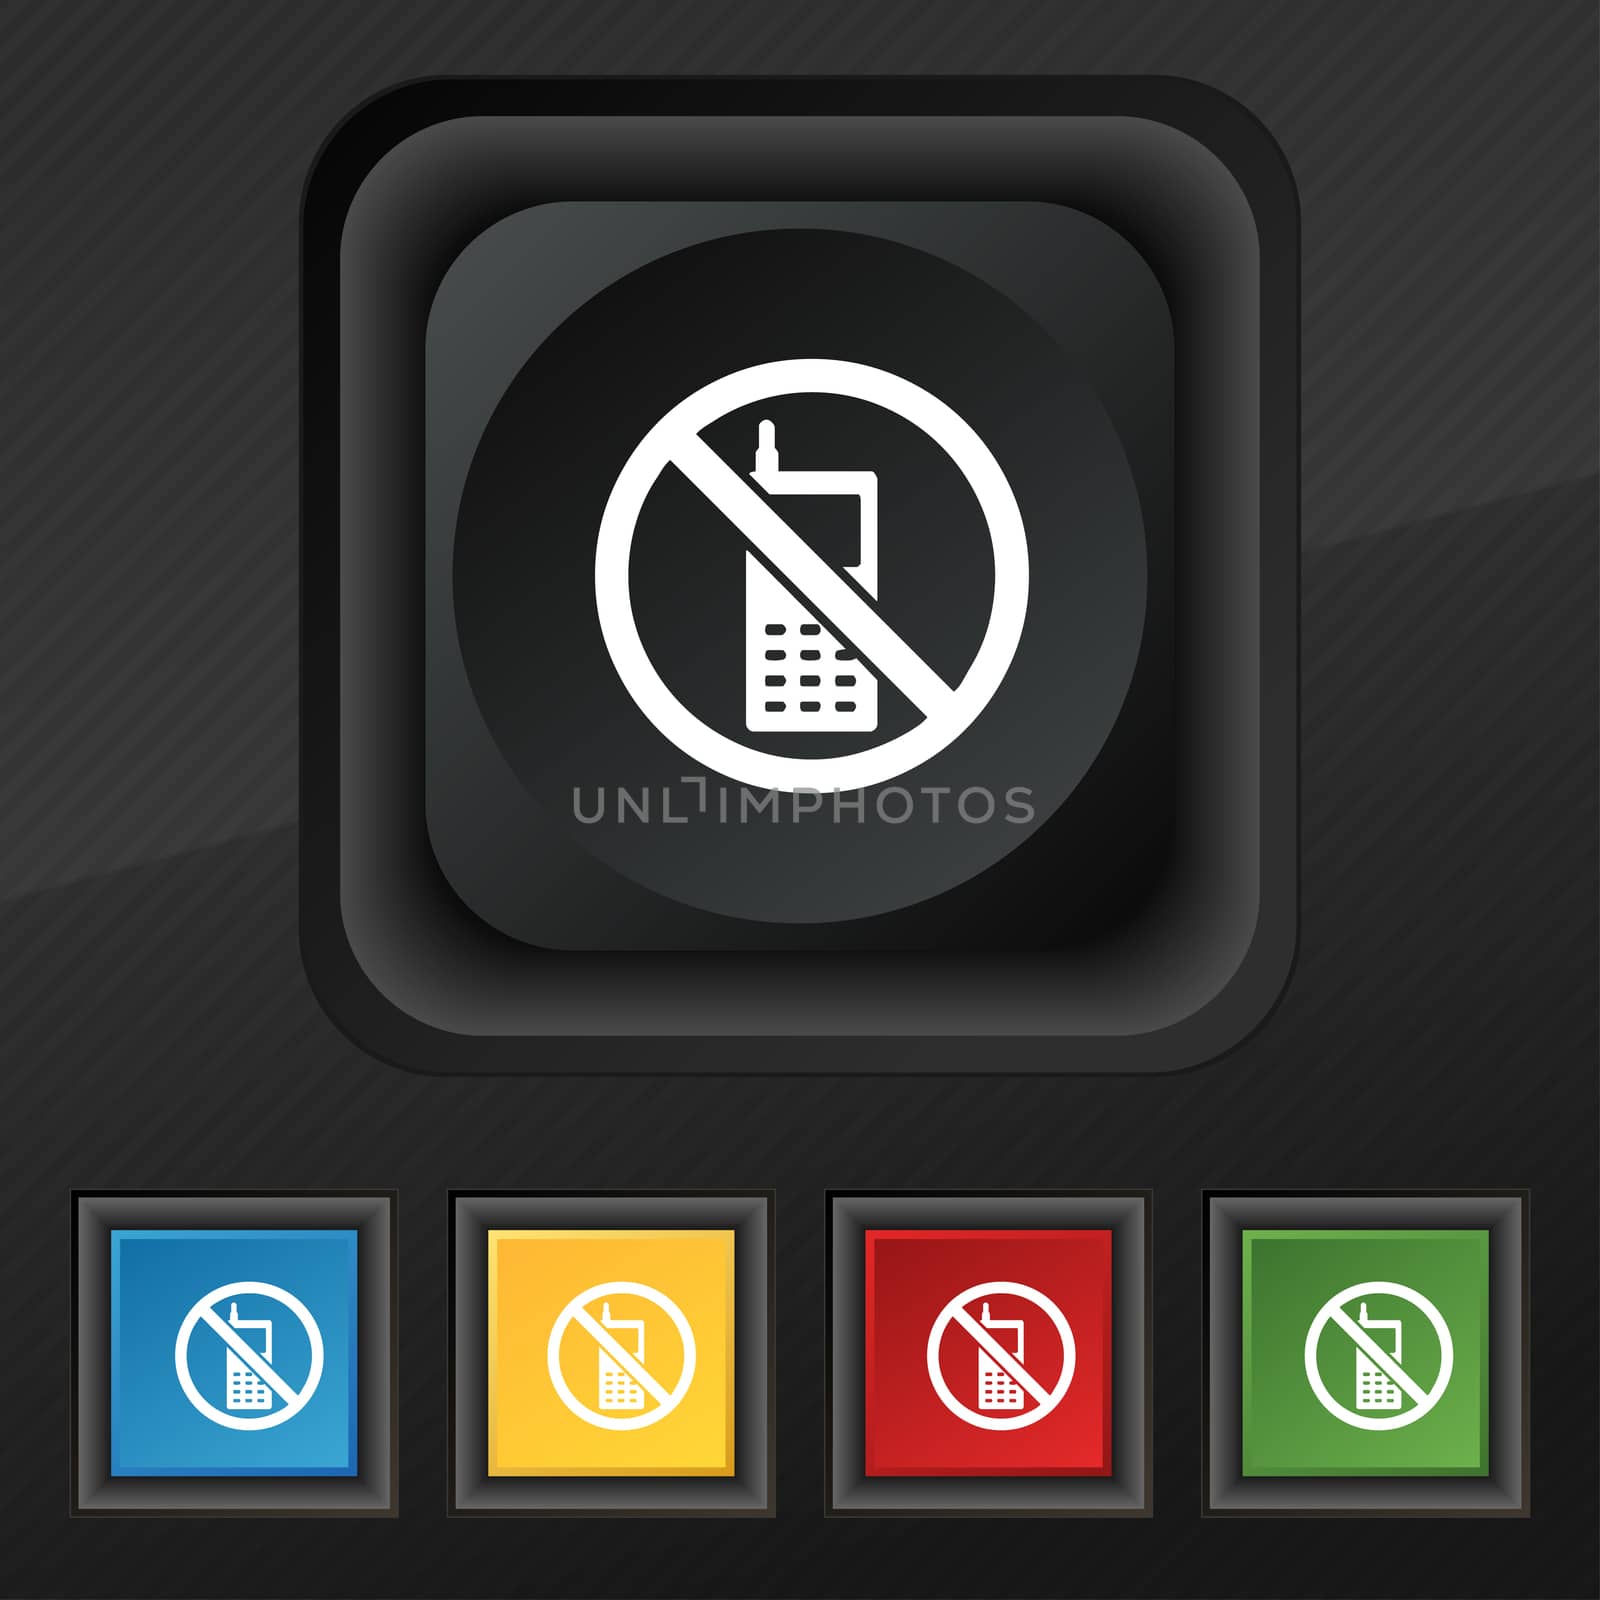 mobile phone is prohibited icon symbol. Set of five colorful, stylish buttons on black texture for your design. illustration